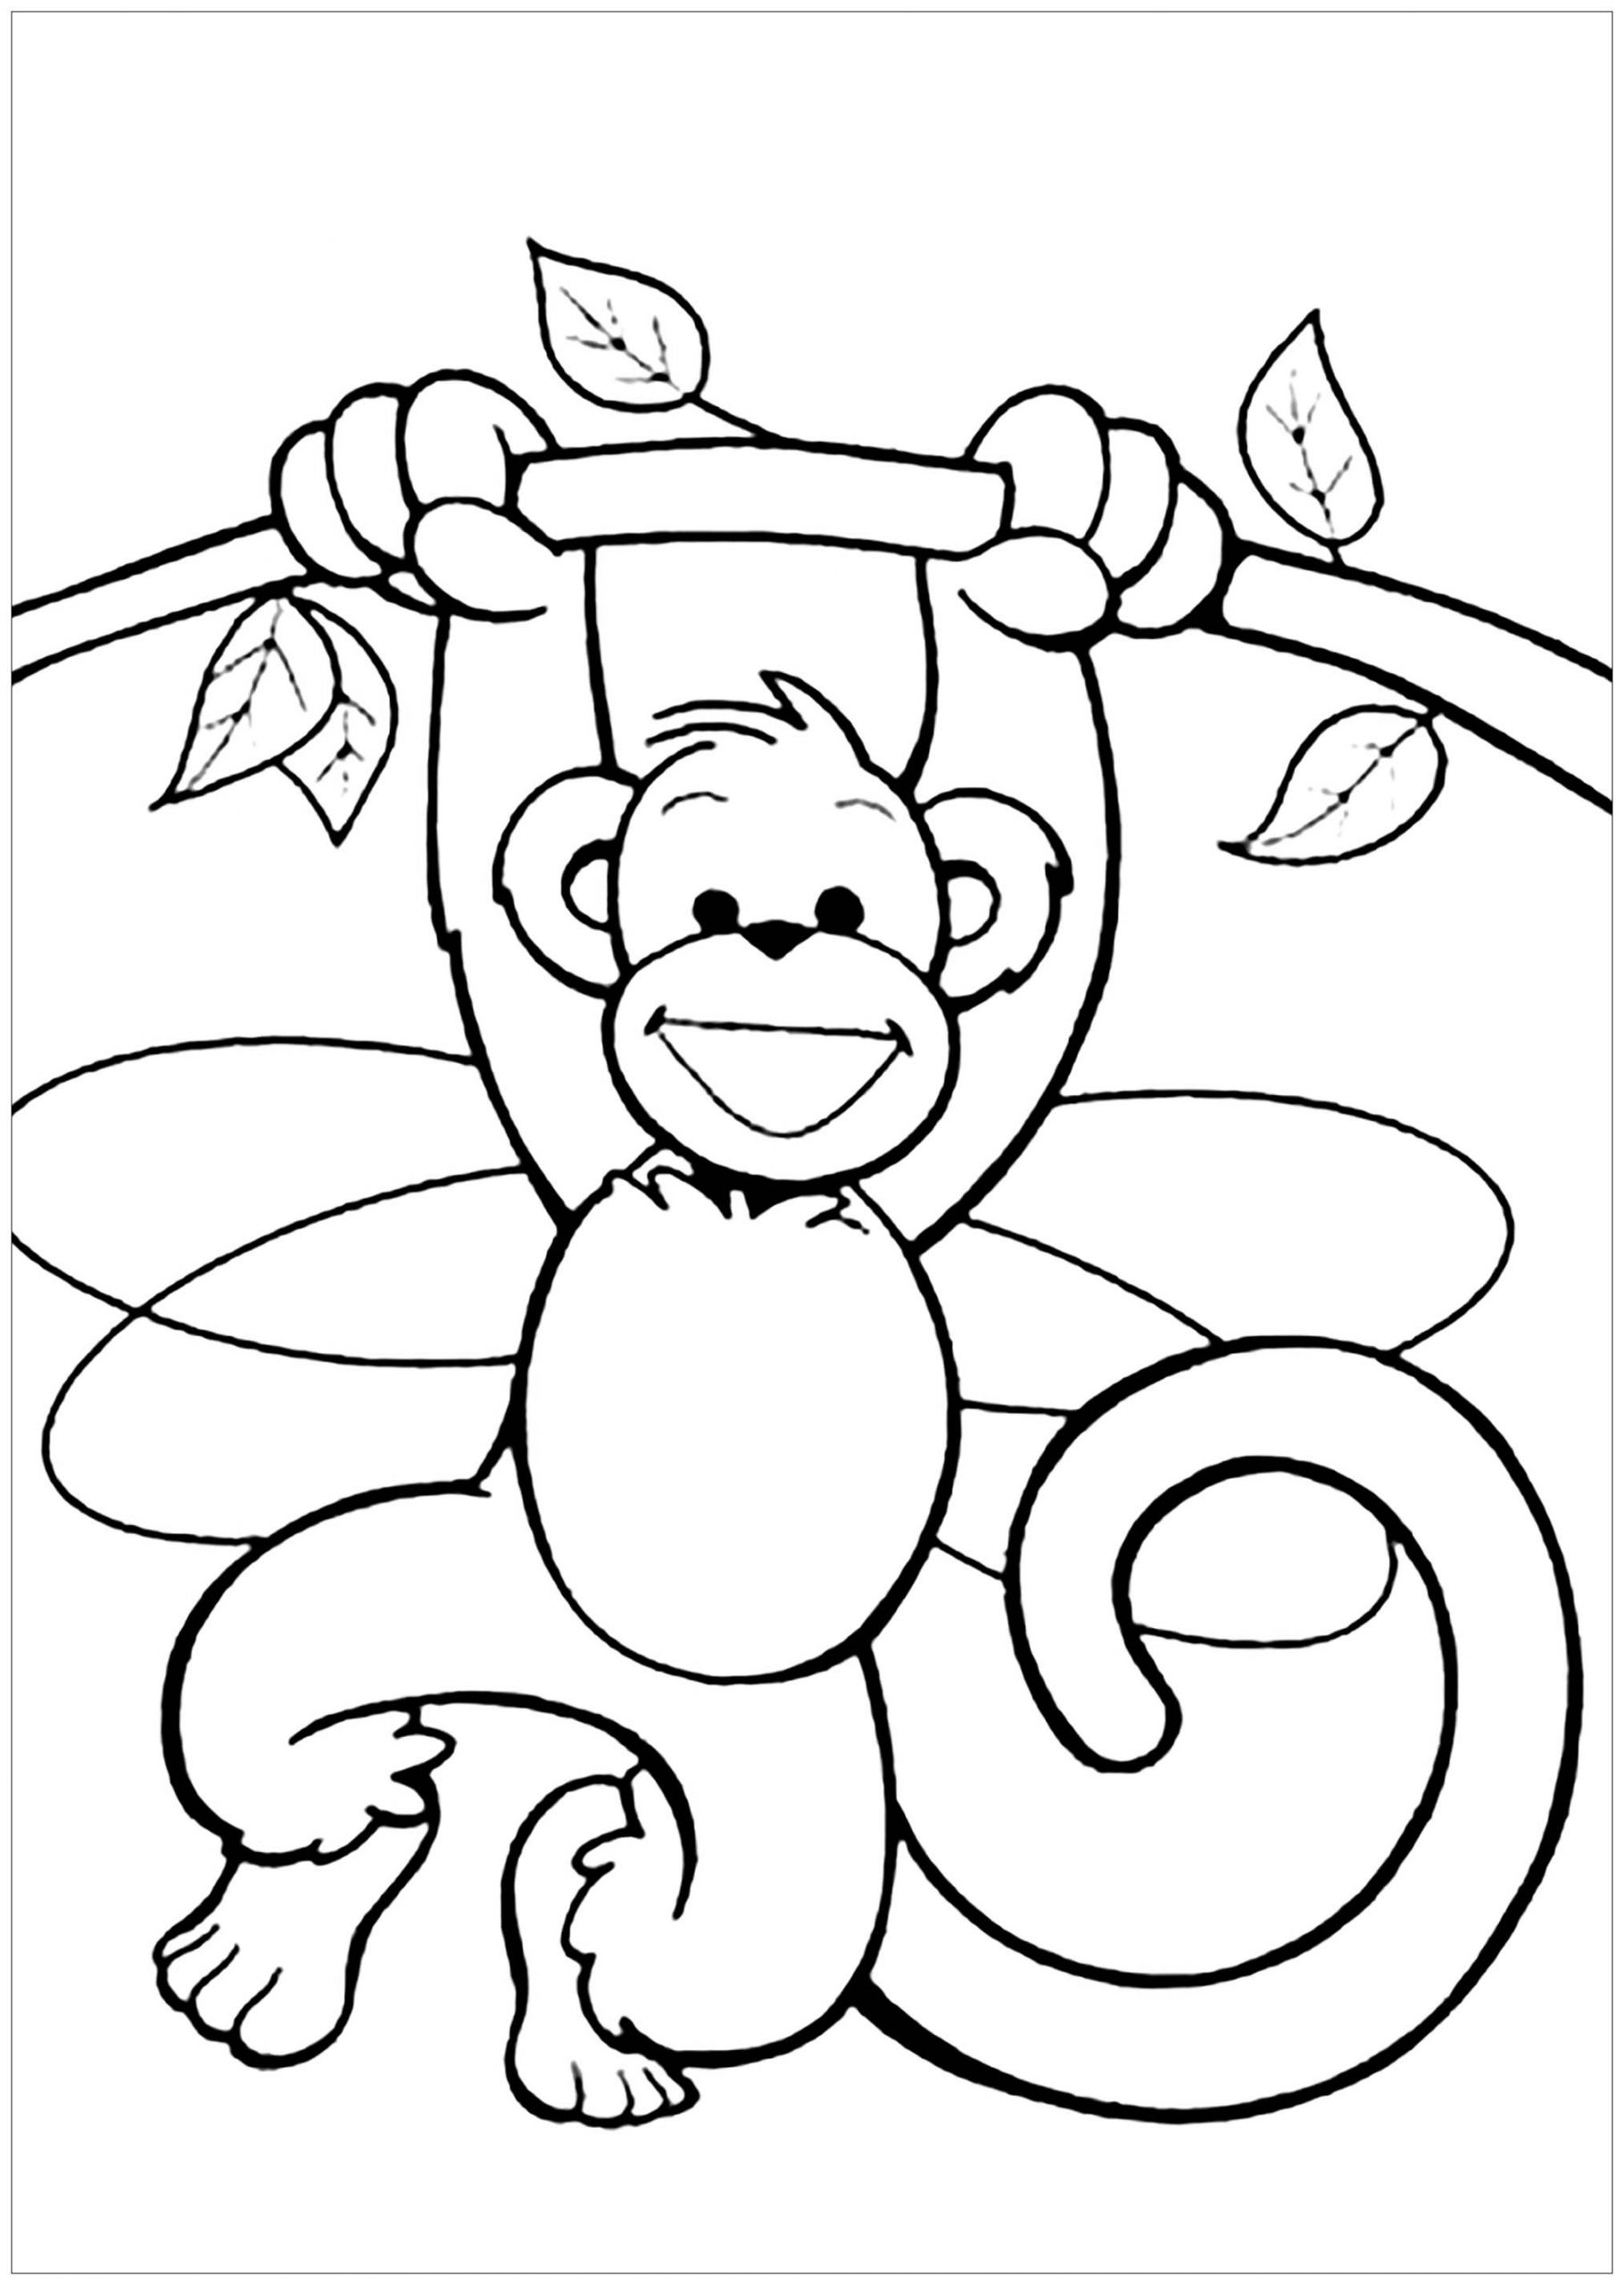 Coloring Pages For Kids Free
 Monkeys to for free Monkeys Kids Coloring Pages